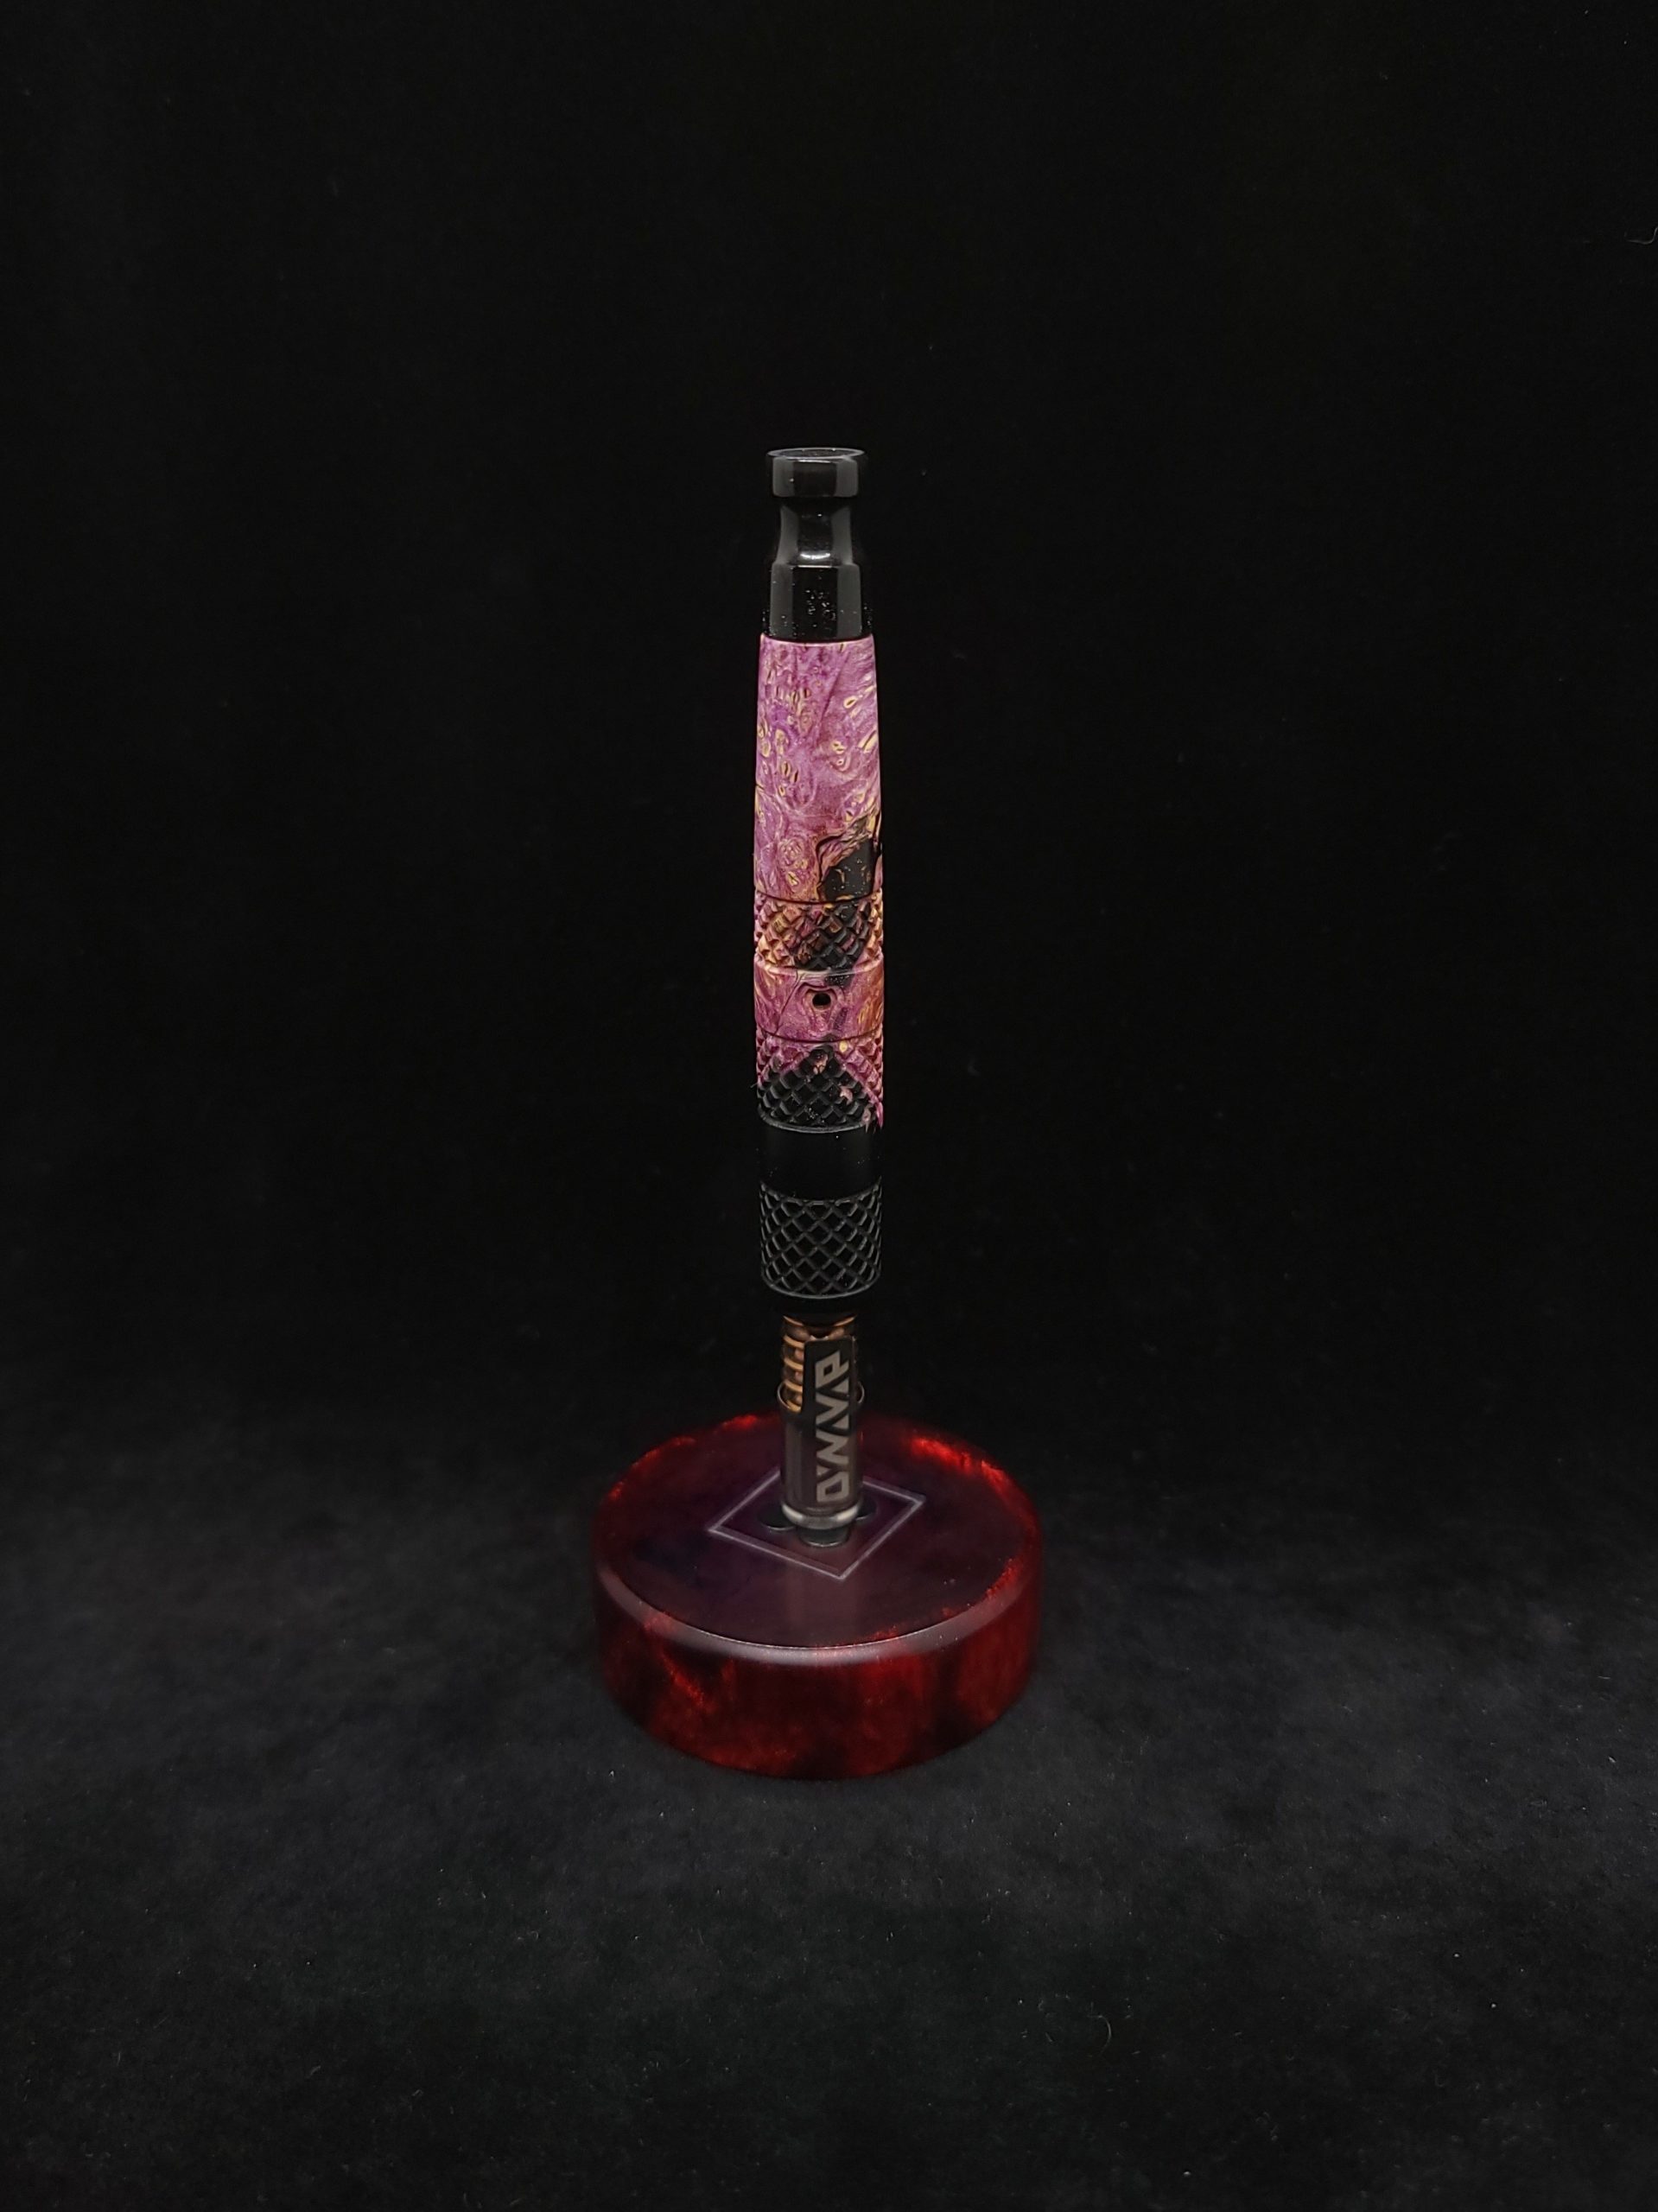 This image portrays High Class-Knurled XL Dynavap Stem/Metal Black Burl Hybrid + Matching Mouthpiece by Dovetail Woodwork.